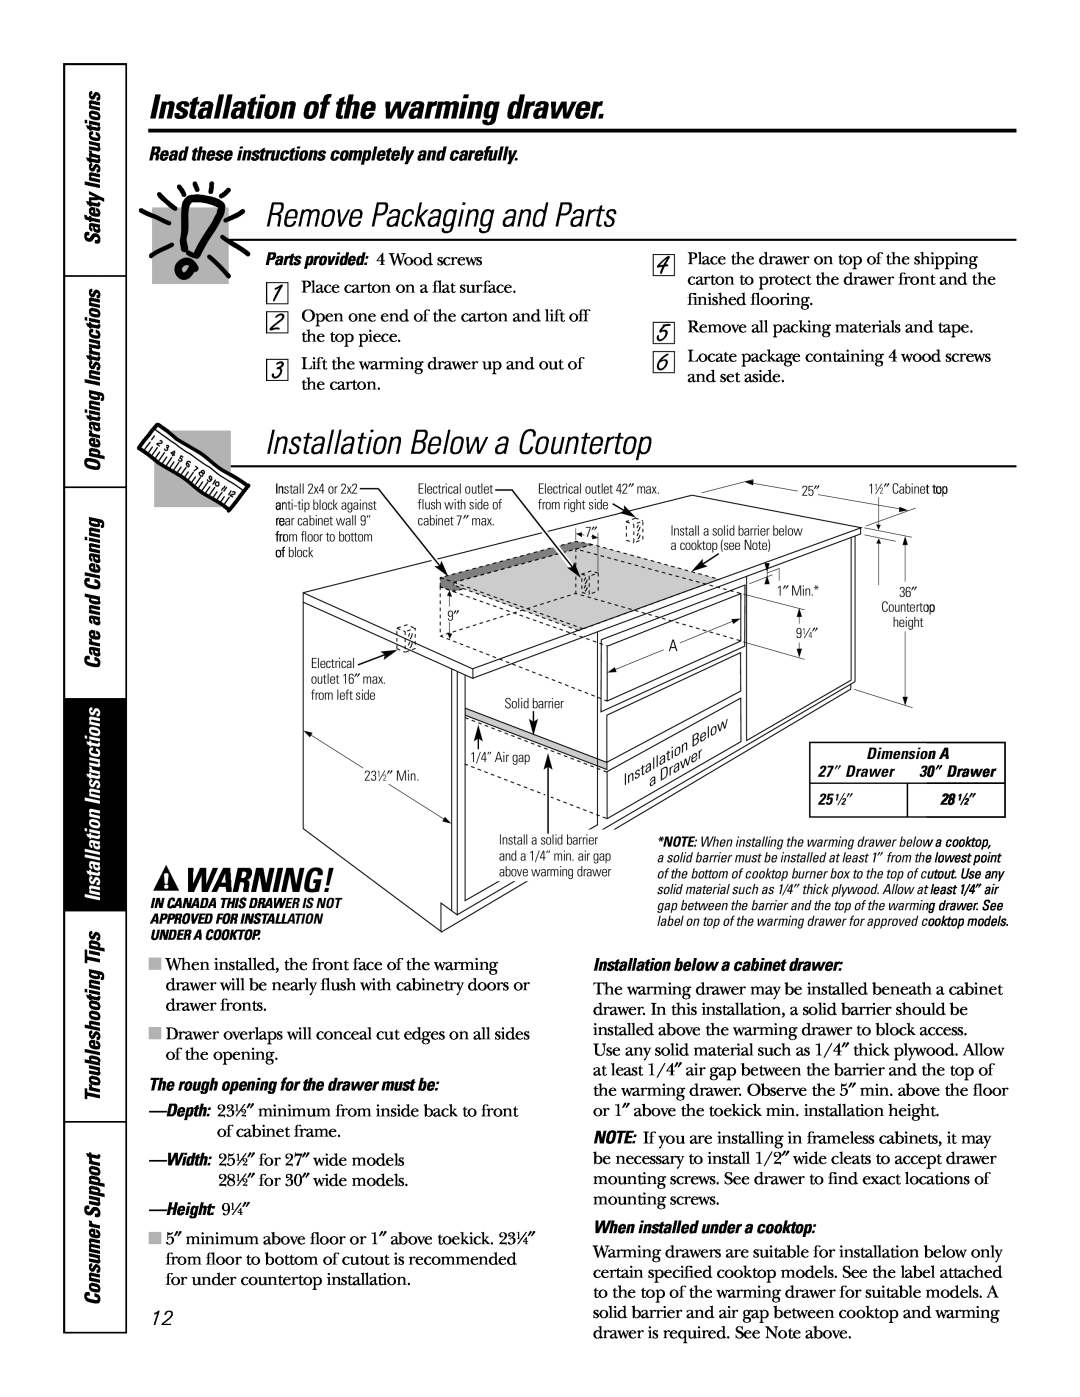 GE JTD915 Remove Packaging and Parts, Installation Below a Countertop, Instructions, Installation of the warming drawer 